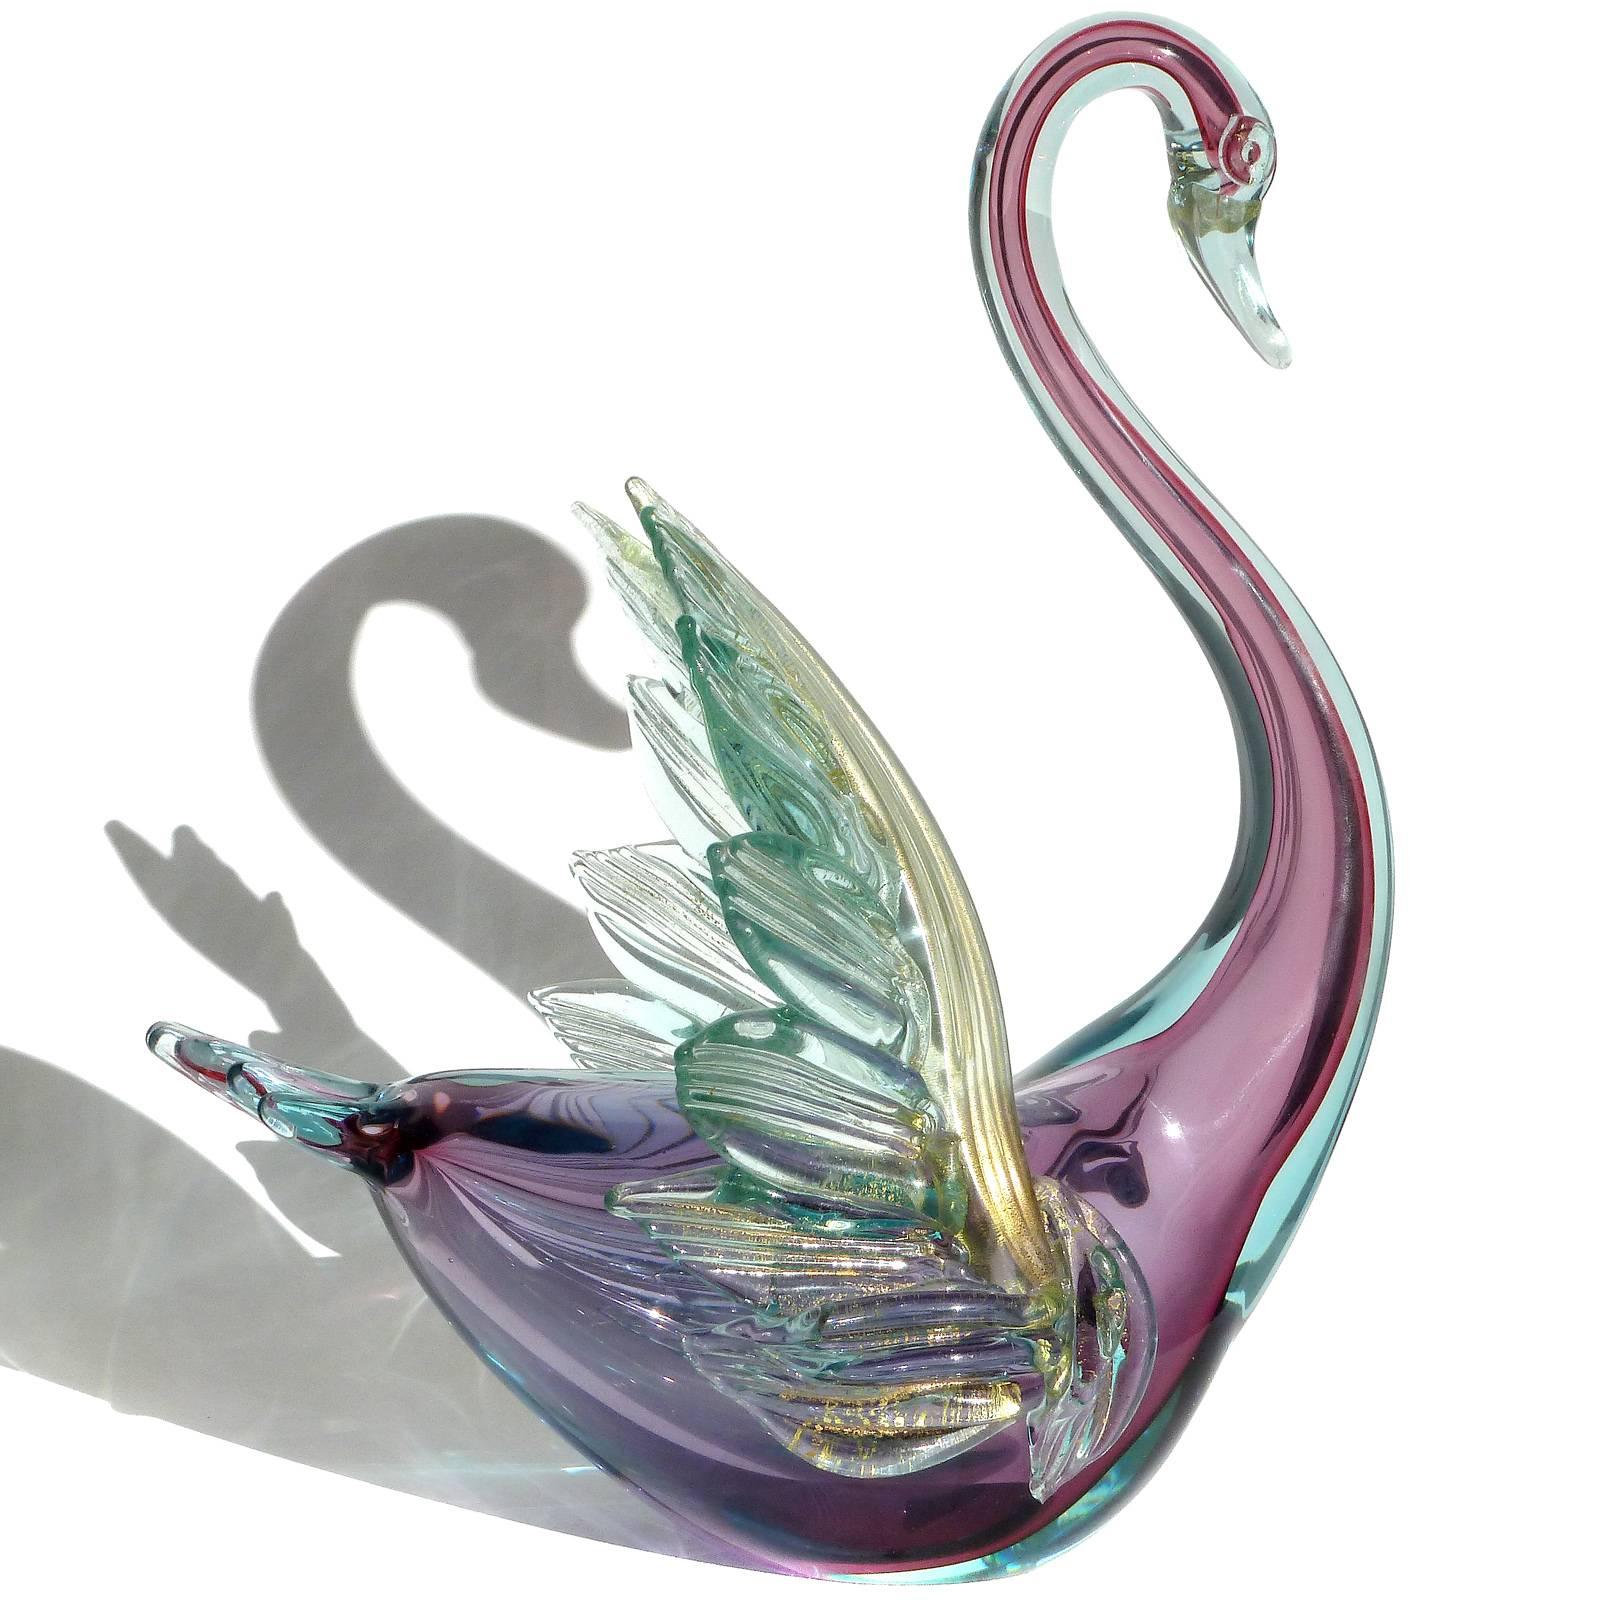 Free shipping worldwide! See details below description.

Large Murano handblown Sommerso purple, blue and gold flecks art glass swan centerpiece sculpture. Documented to designer Alfredo Barbini, circa 1950s-1960s, and published in his catalog.